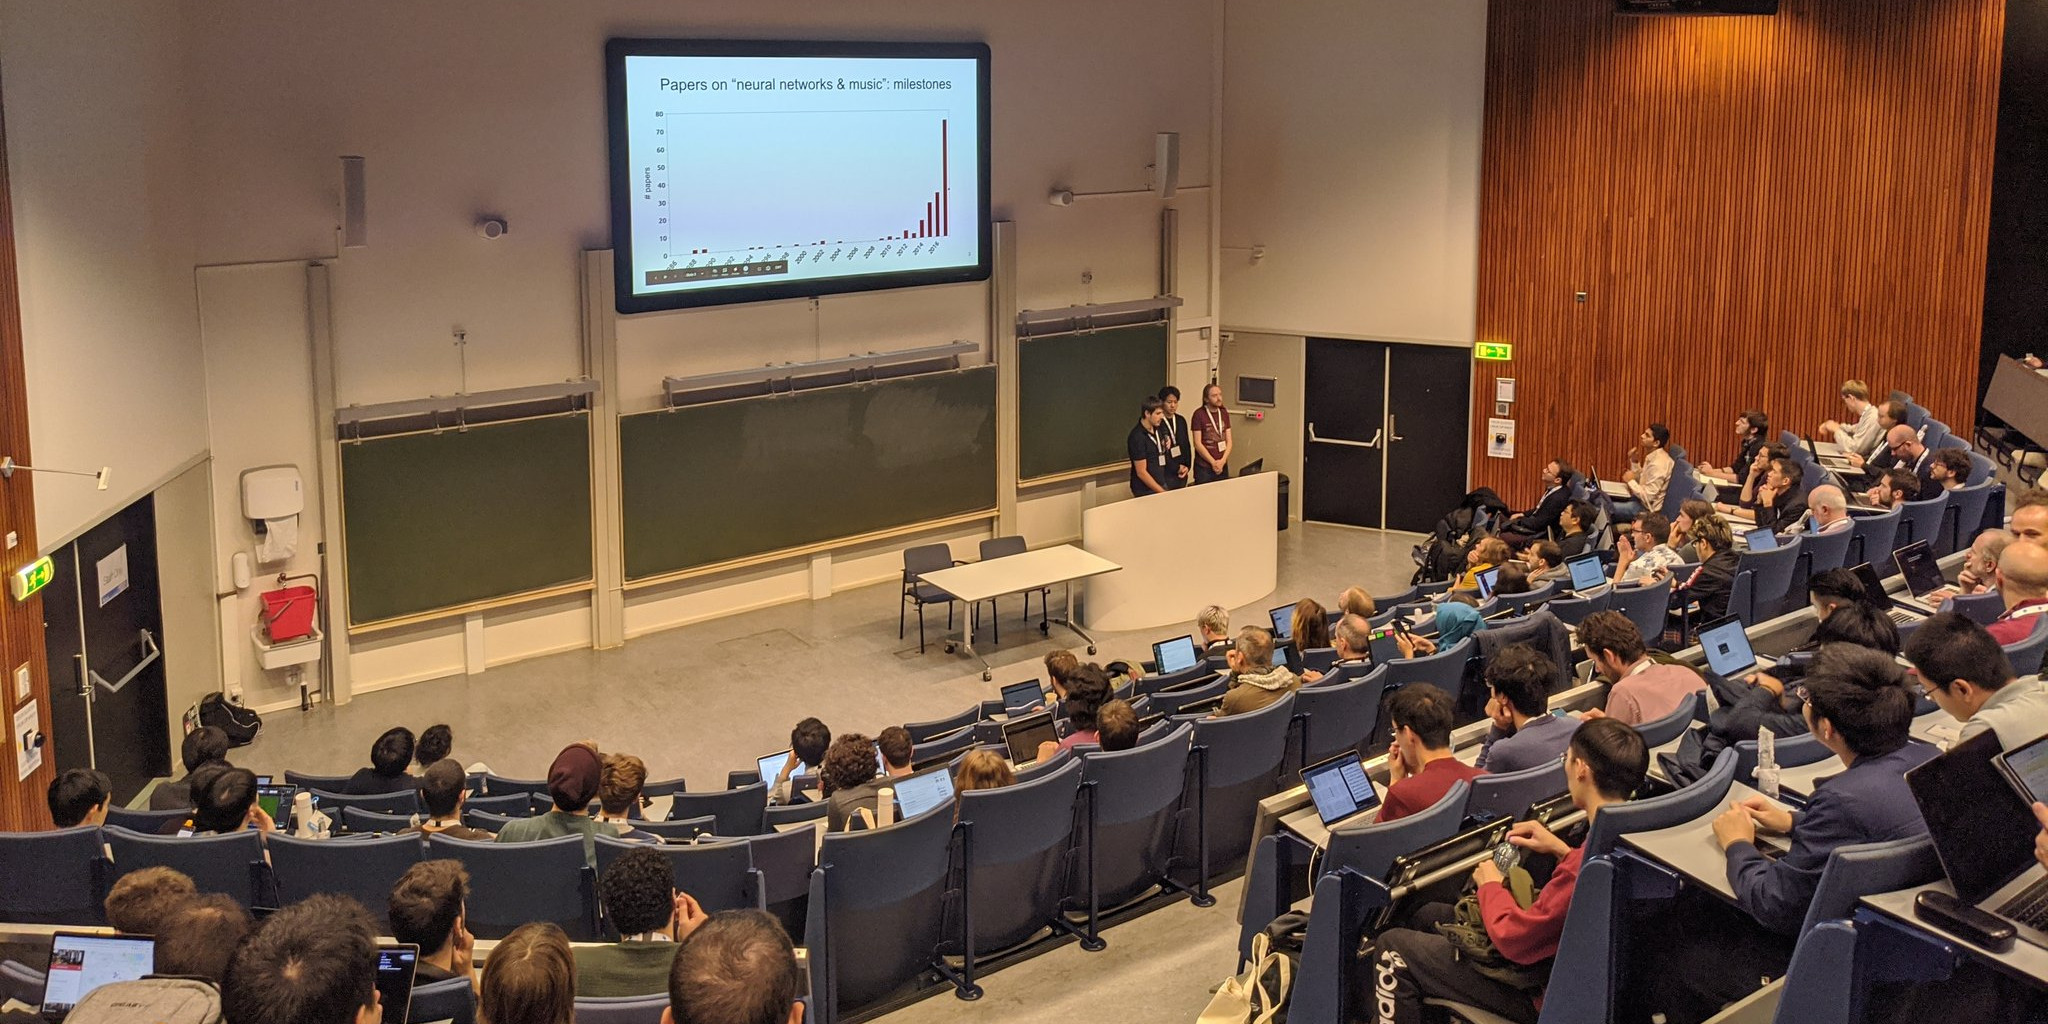 Presenting our tutorial session at ISMIR 2019 in Delft, The Netherlands.